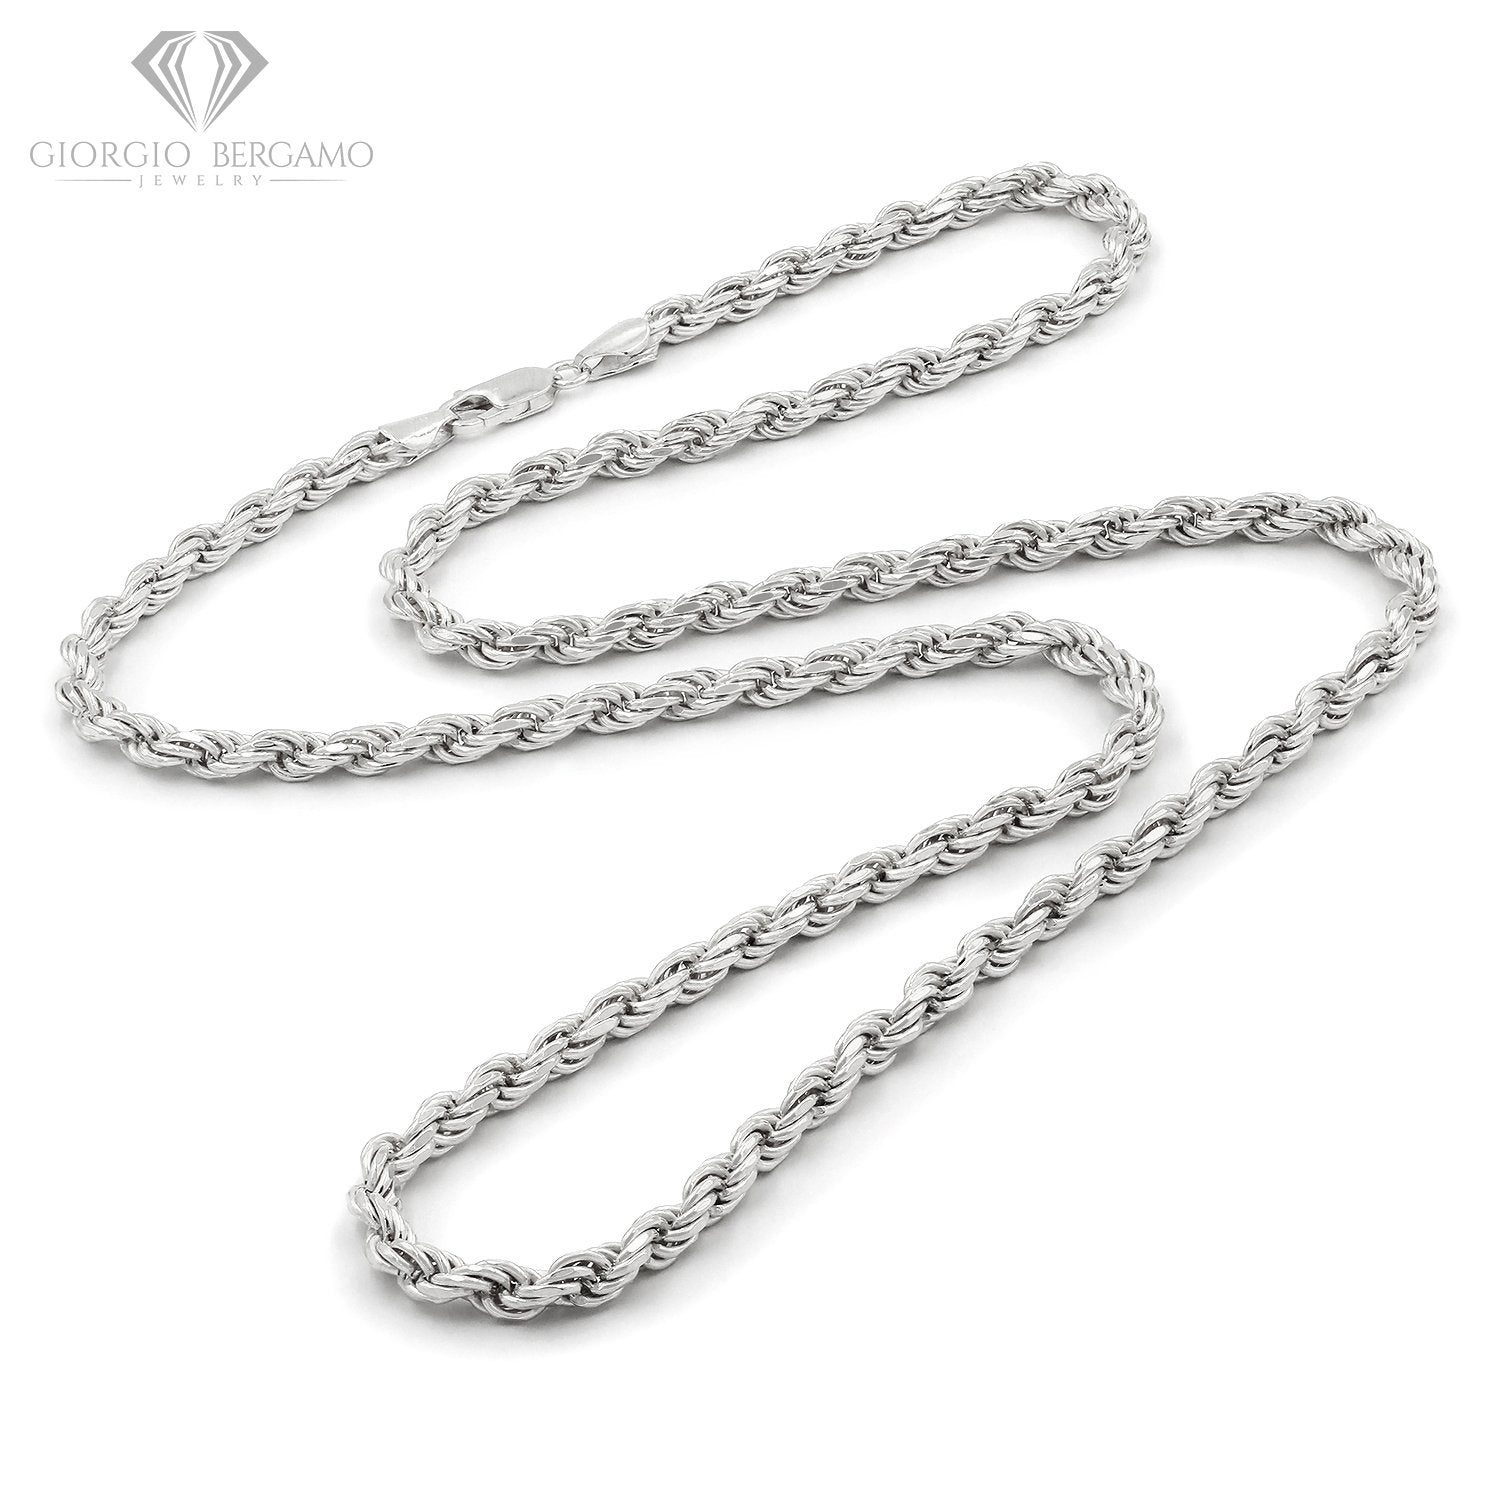 925 Sterling Silver Solid Rope 5mm Diamond Cut ITProLux Chain